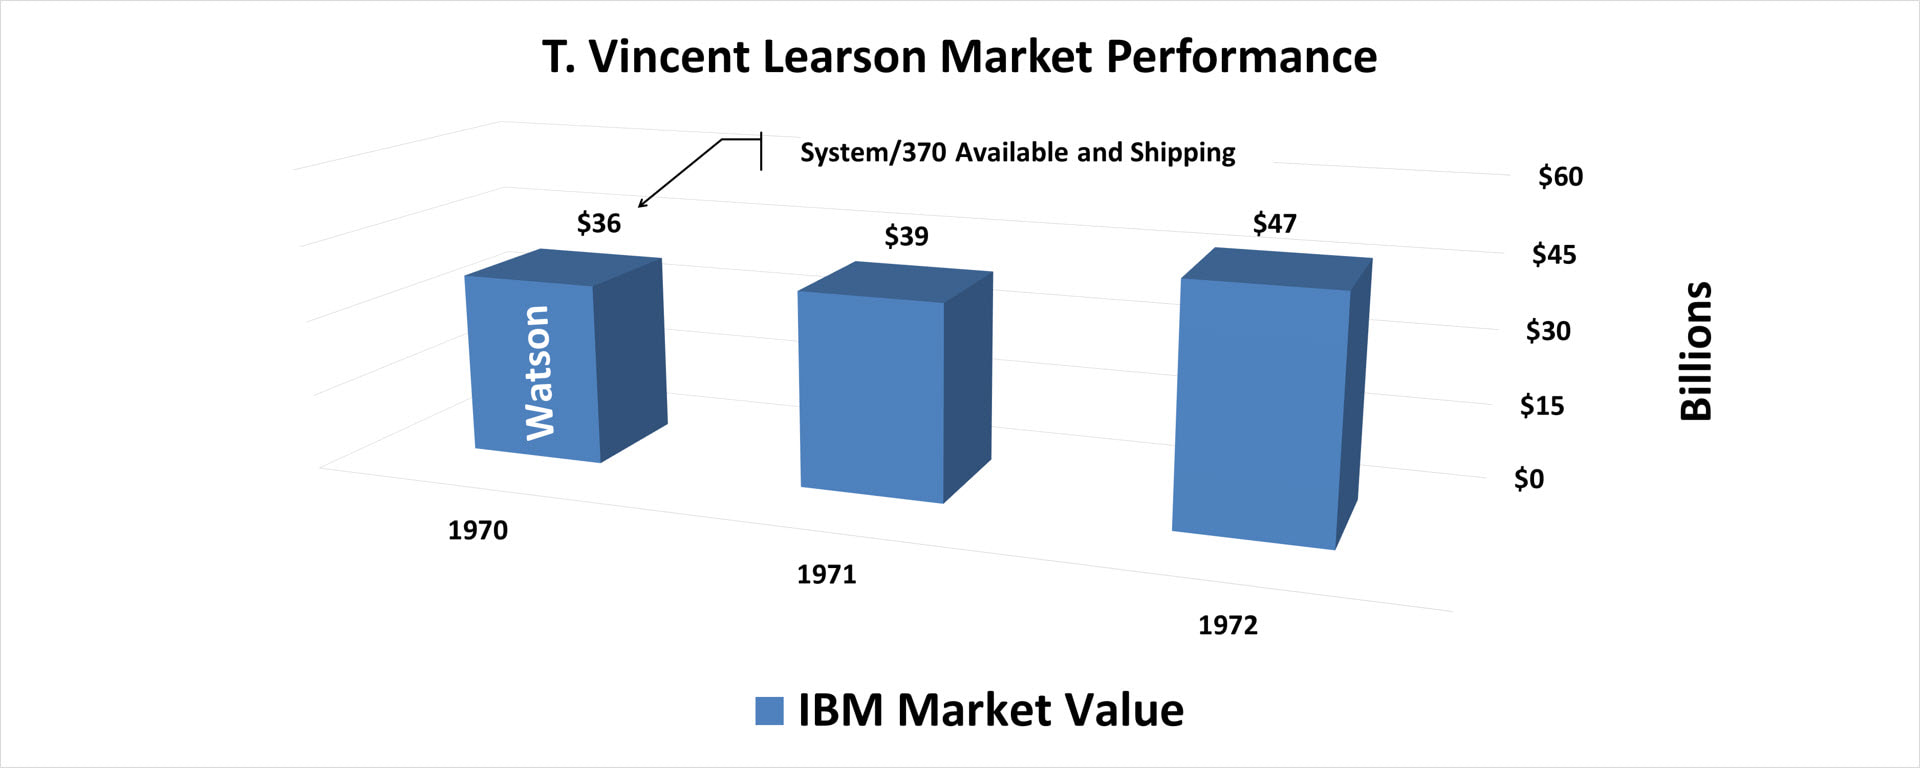 A color bar chart showing IBM's yearly market value from 1971 to 1973 for Chief Executive Officer (CEO) T. Vincent (Vin) Learson.